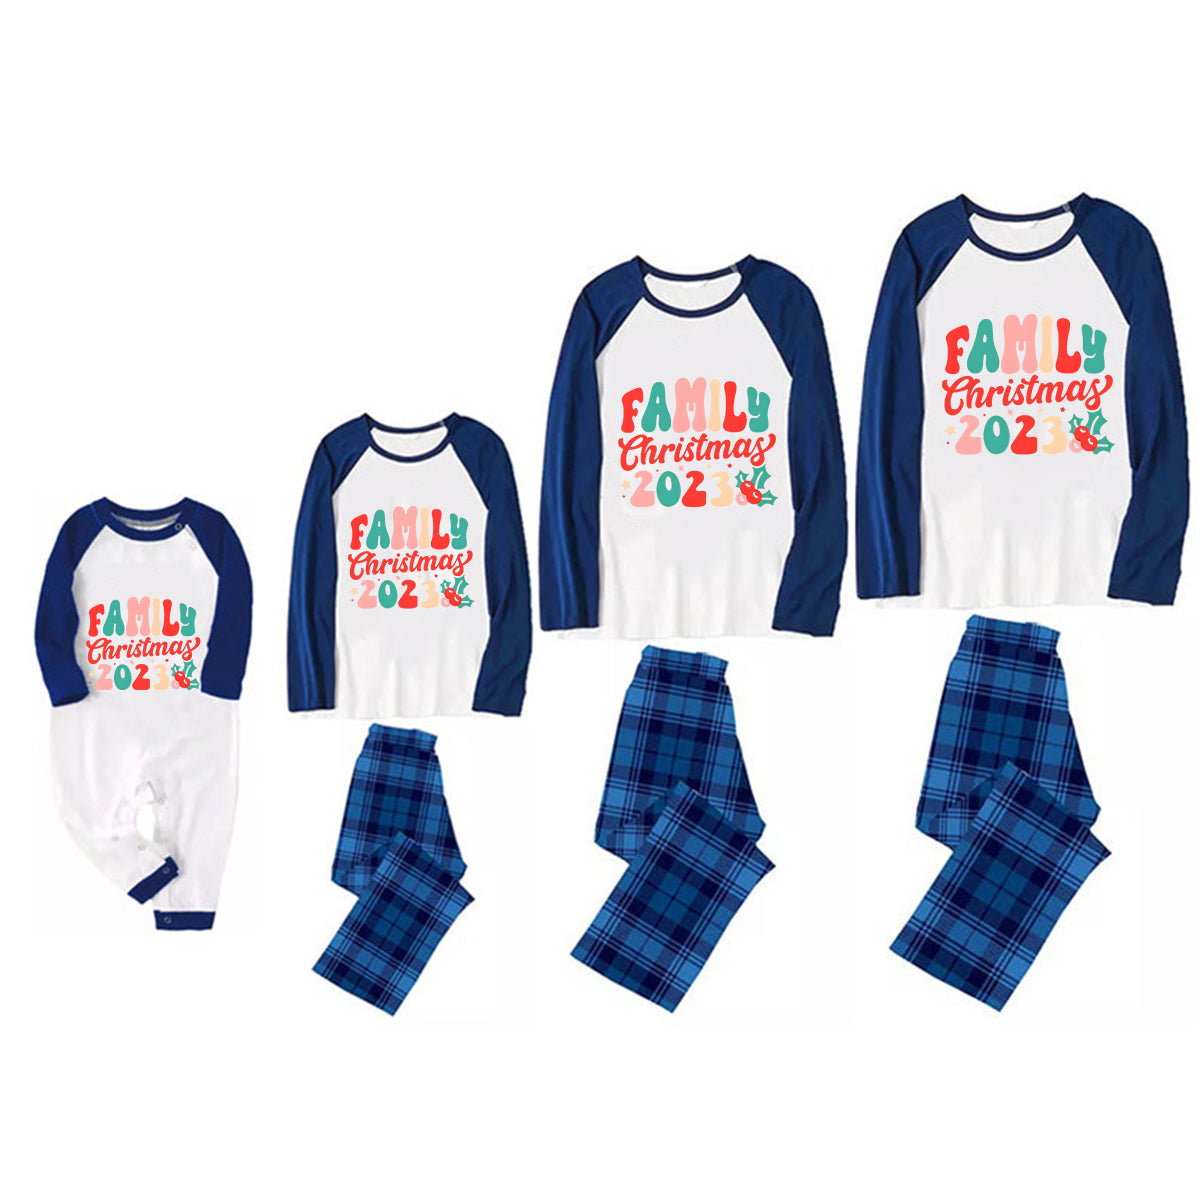 Christmas ‘ Family Christmas 2023’ Letter Print Patterned Casual Long Sleeve Sweatshirts Blue Sleeve Contrast Tops and Blue Plaid Pants Family Matching Pajamas Sets With Dog Bandan